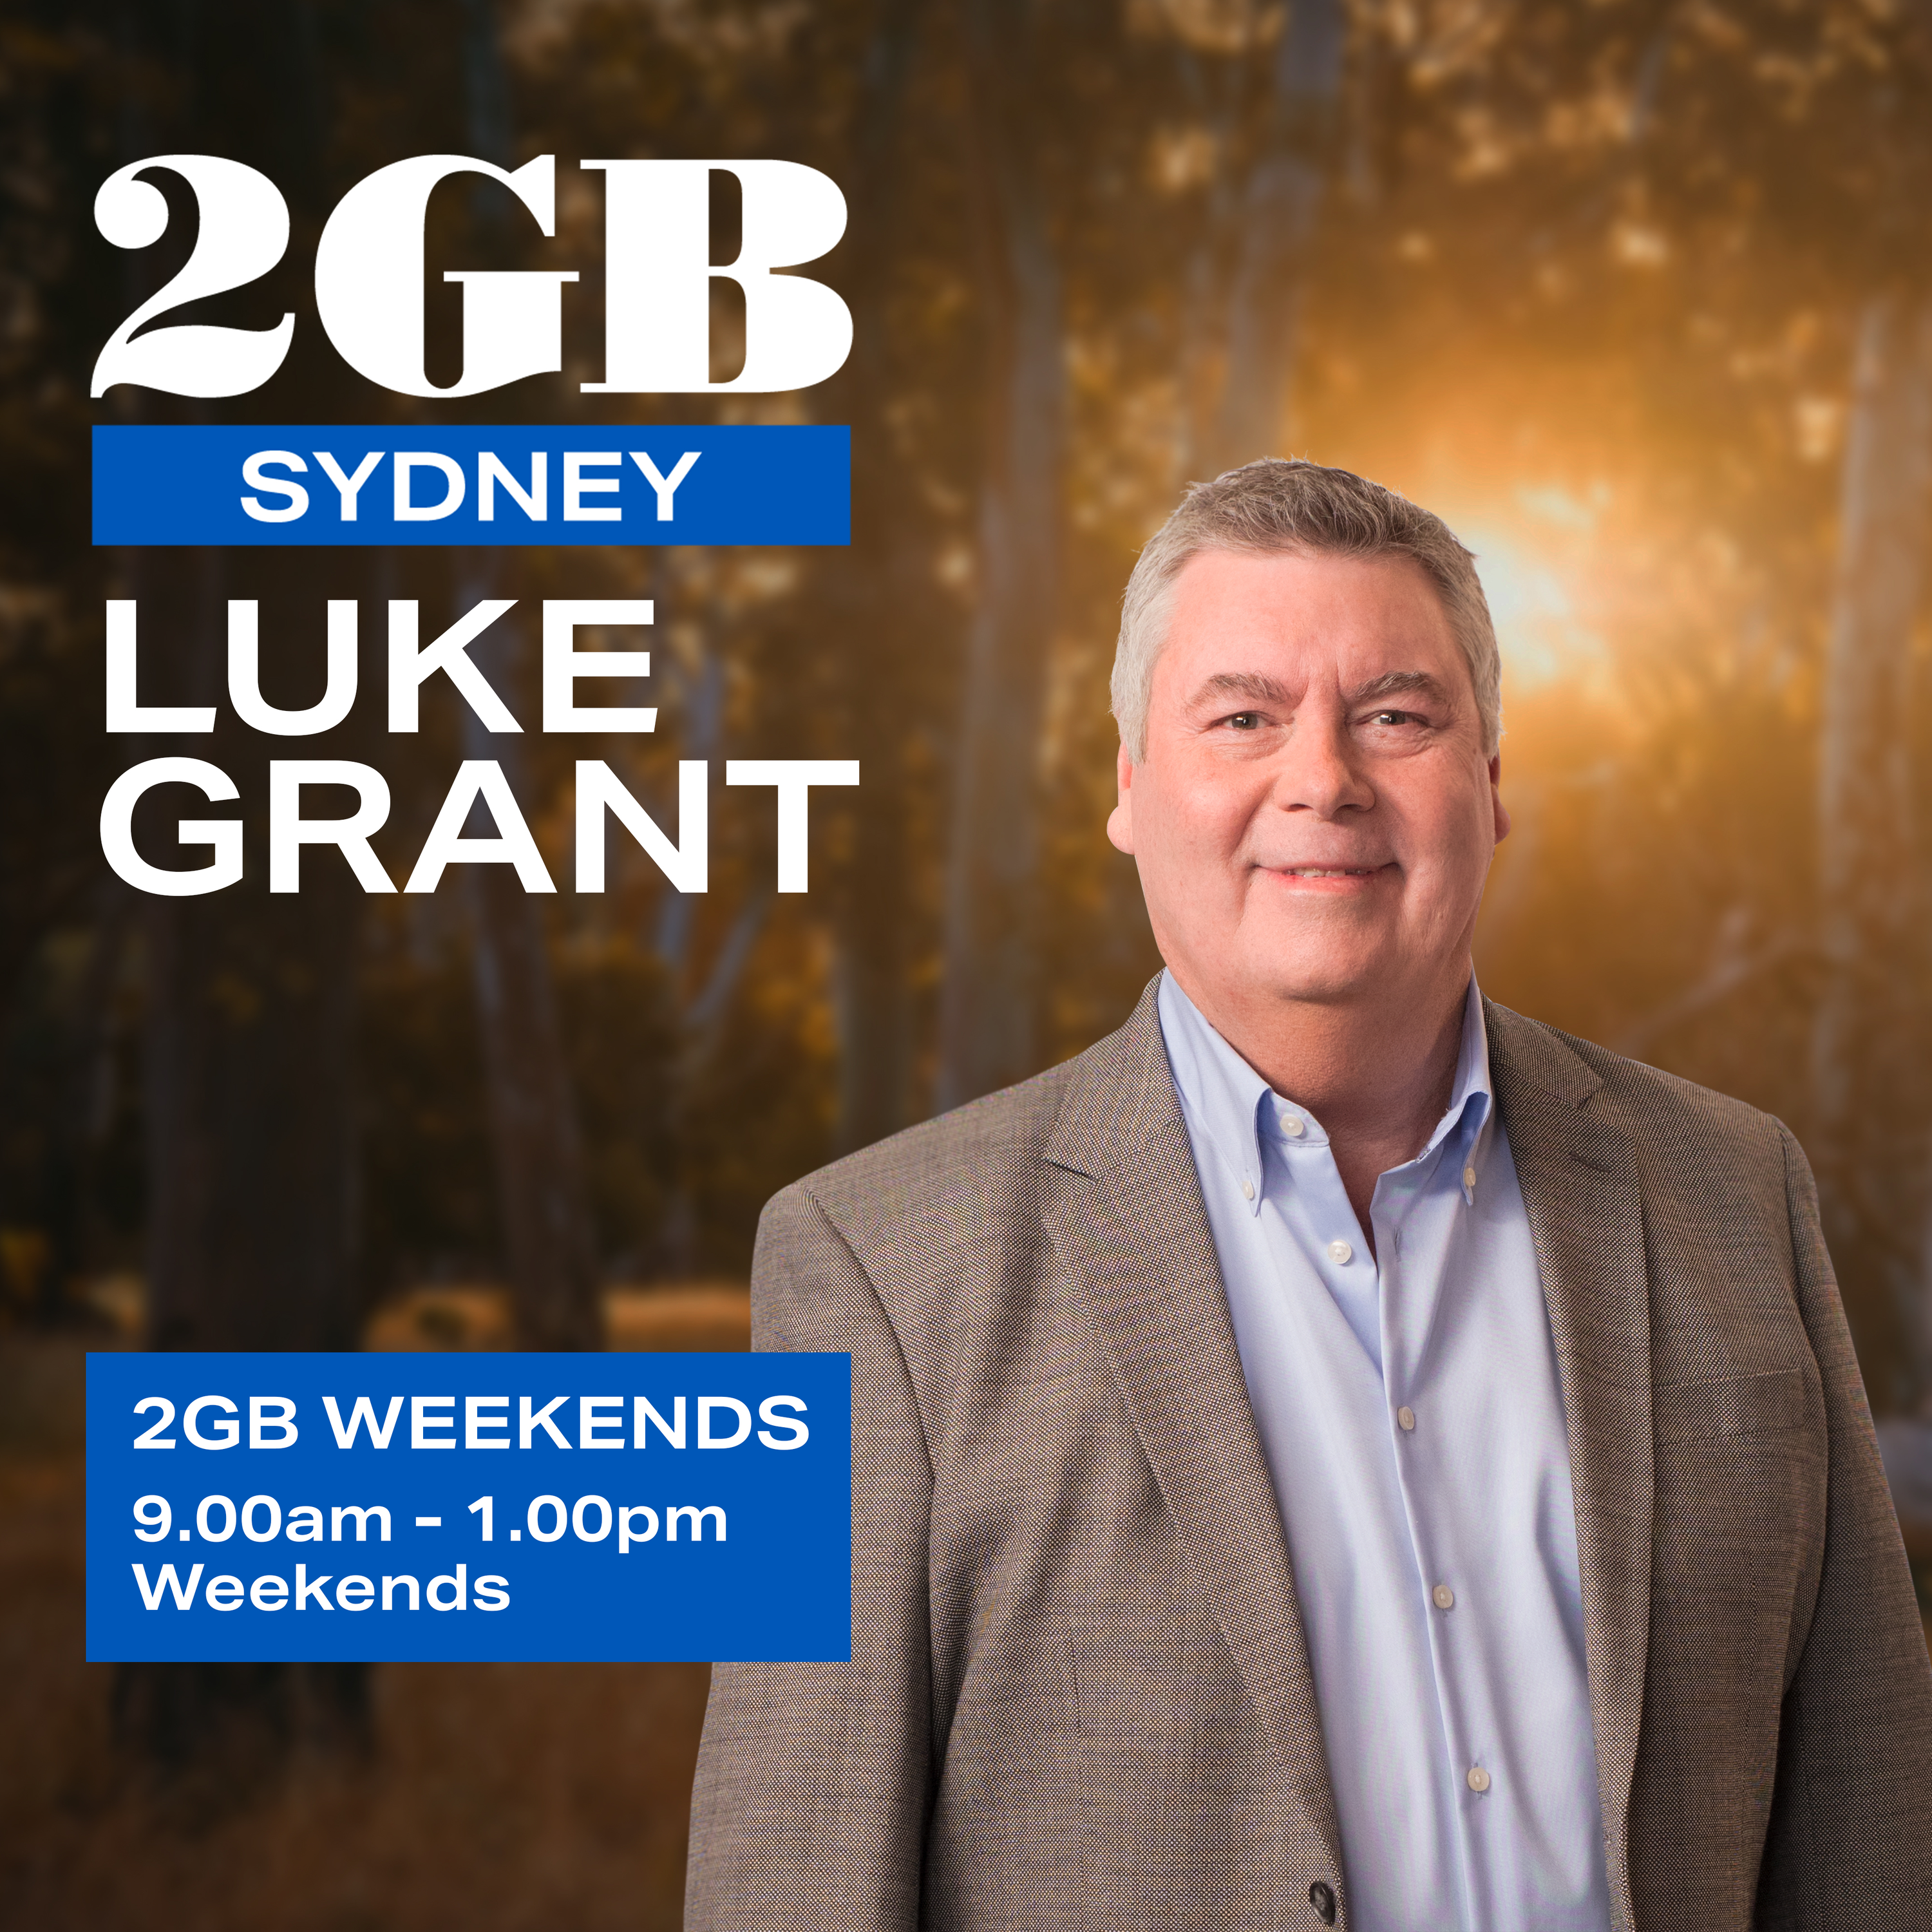 Weekends with Luke Grant - Sunday, 12th of May